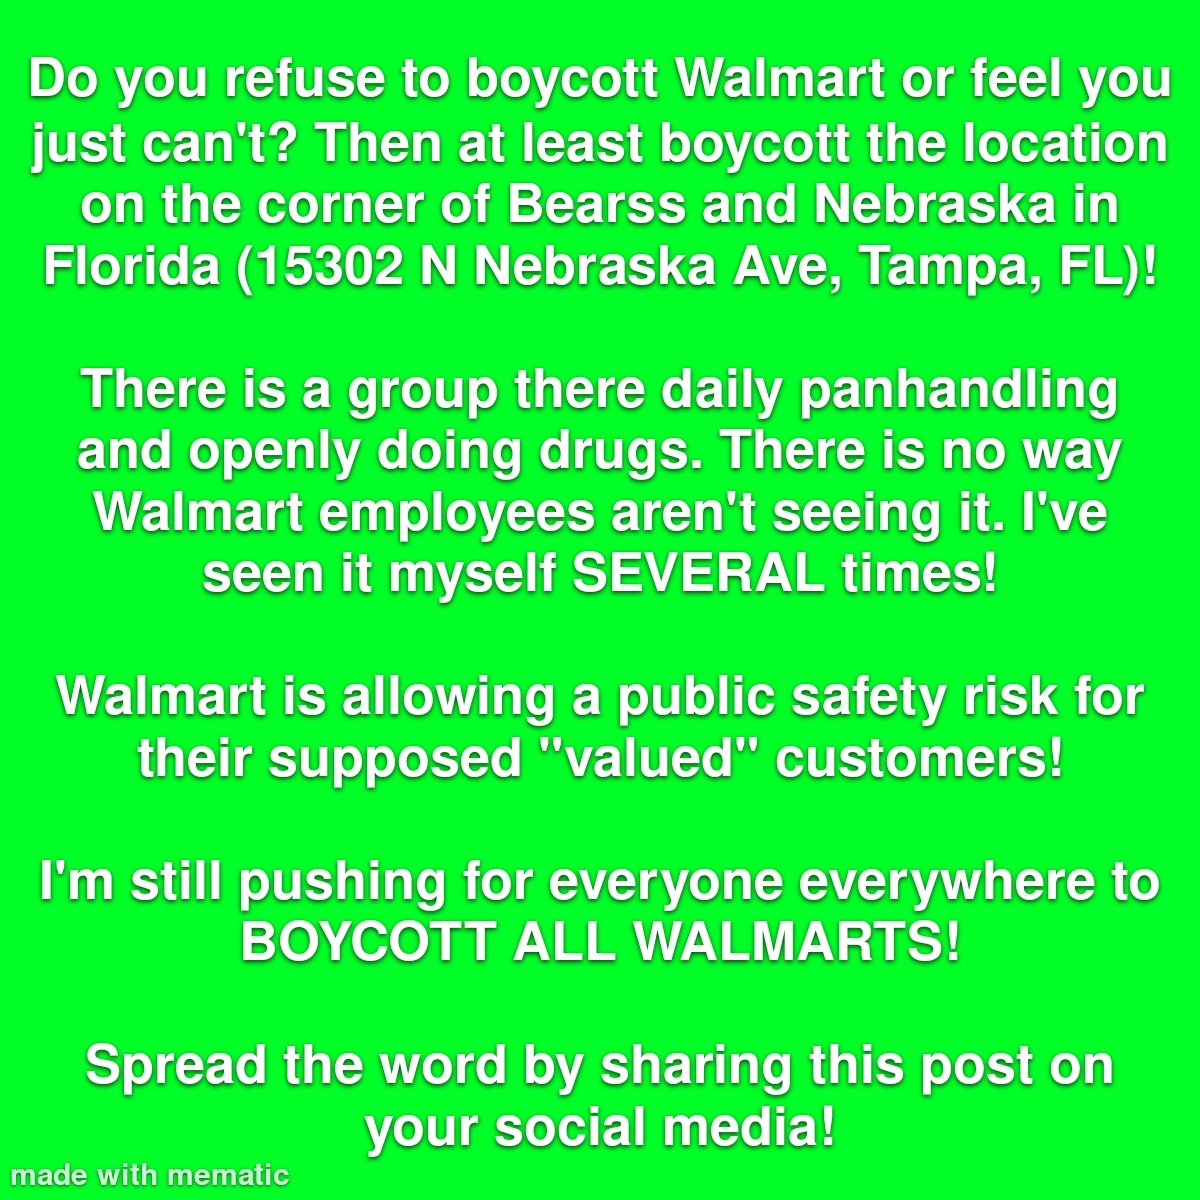 Do you refuse to boycott Walmart or feel you just can't? Then at least boycott the location on the corner of Bearss and Nebraska in Florida (15302 N Nebraska Ave, Tampa, FL)!

#Boycott #BoycottWalmart #walmart #walmartdeals #walmartfinds @Walmart
@WalmartWorld
@walmarthelp